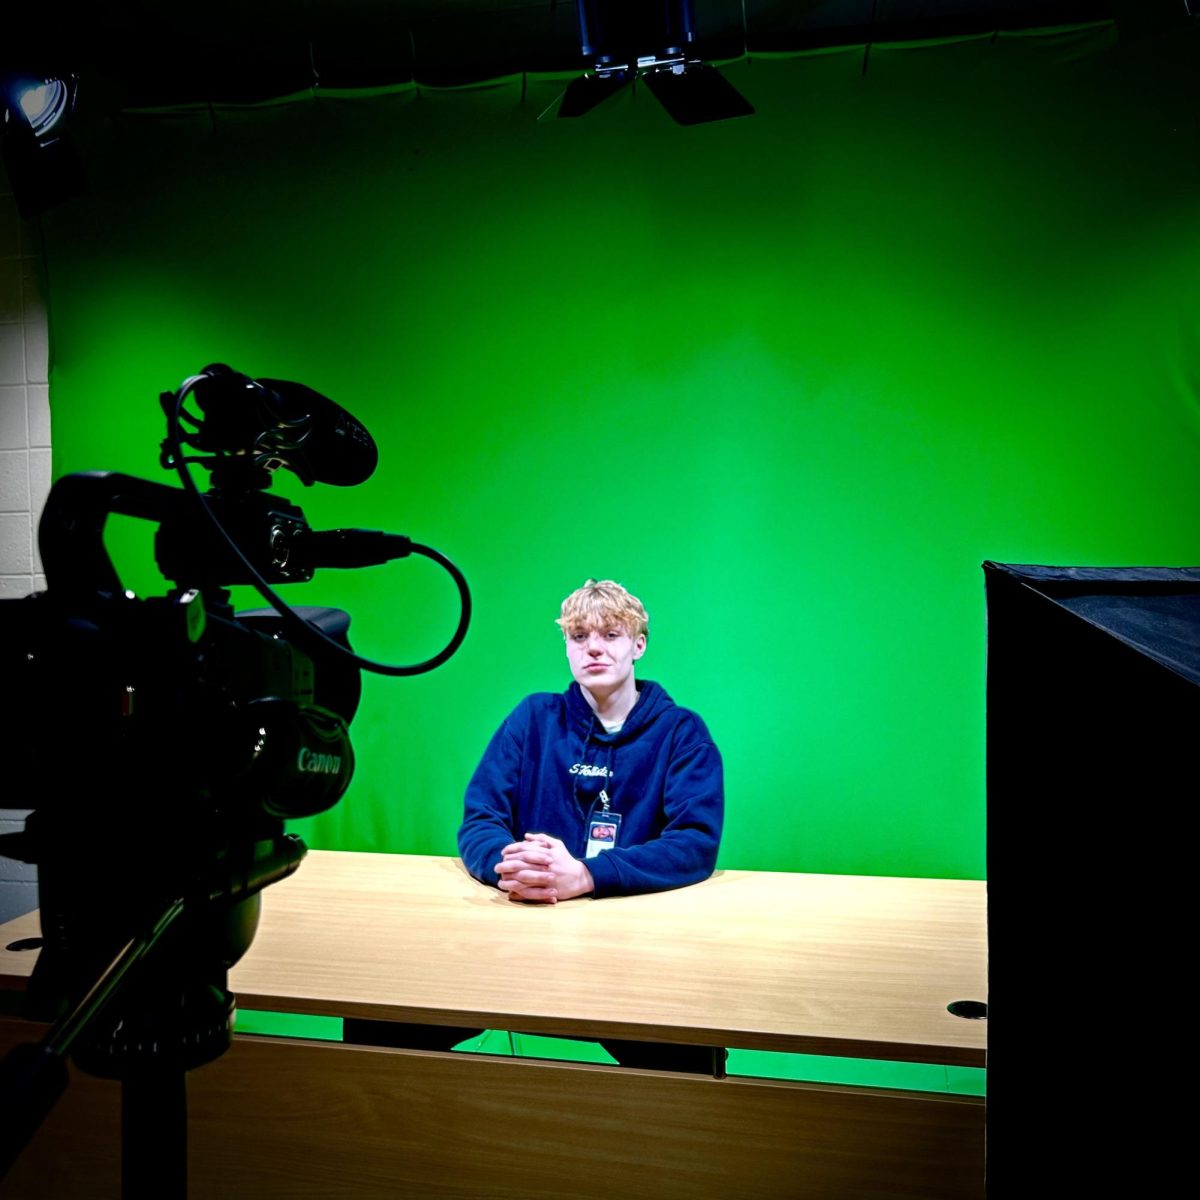 CRTV+Student+Xander+Gause+sitting+in+the+green+room.+%28Photo+Credit%3A+Colby+Wilcox%29